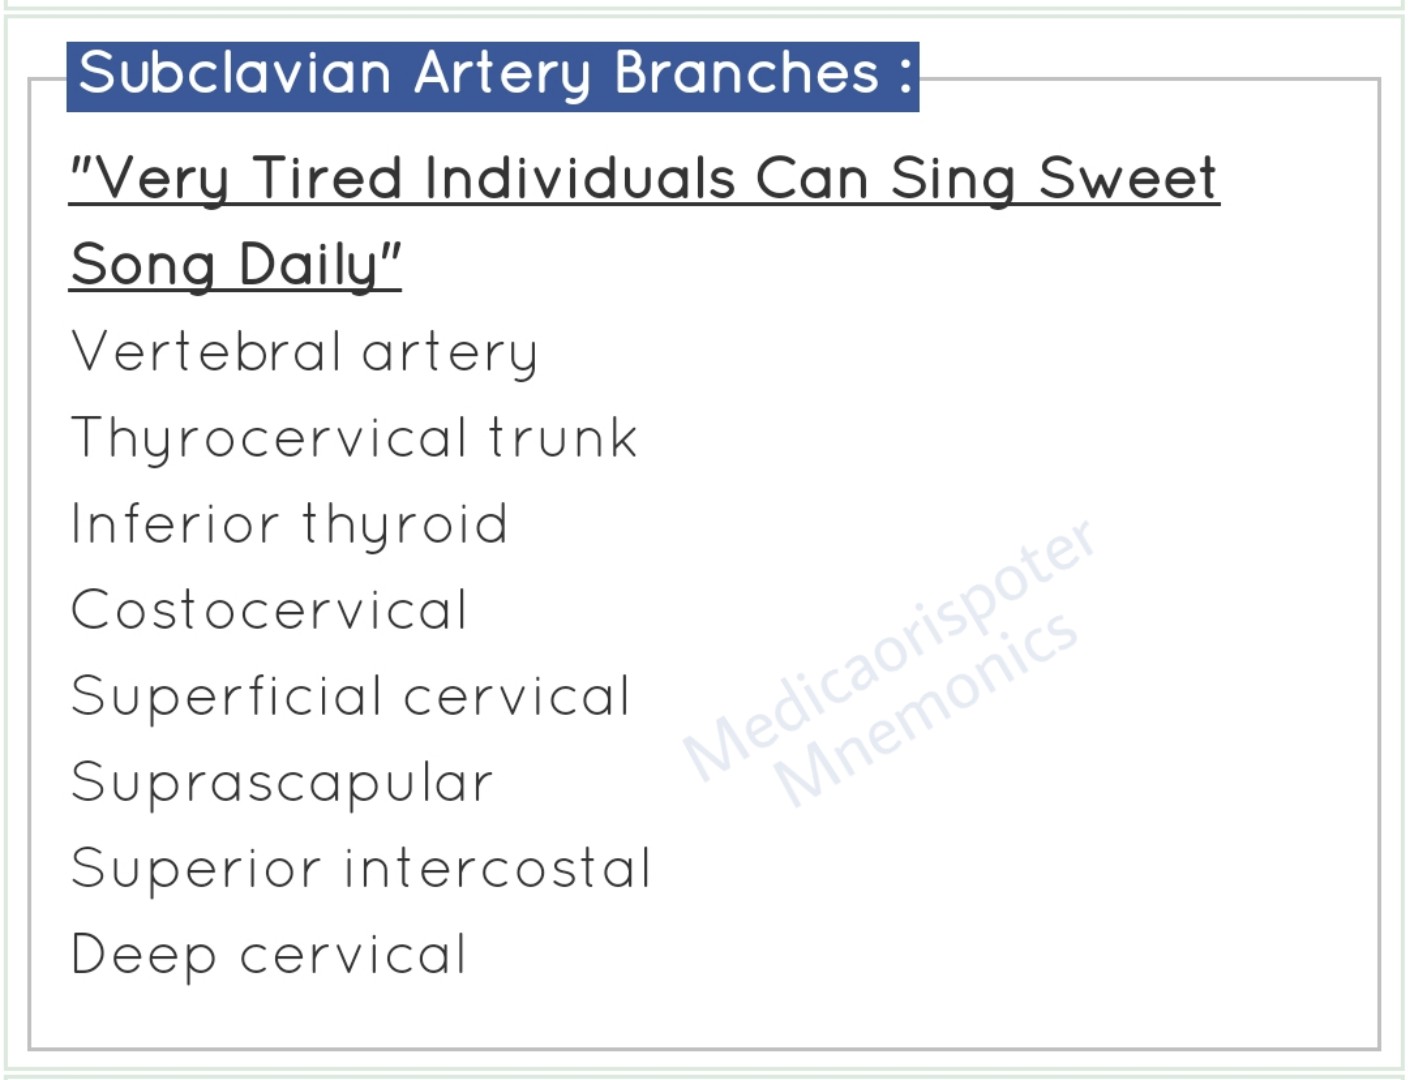 Branches_of_Subclavian_Artery